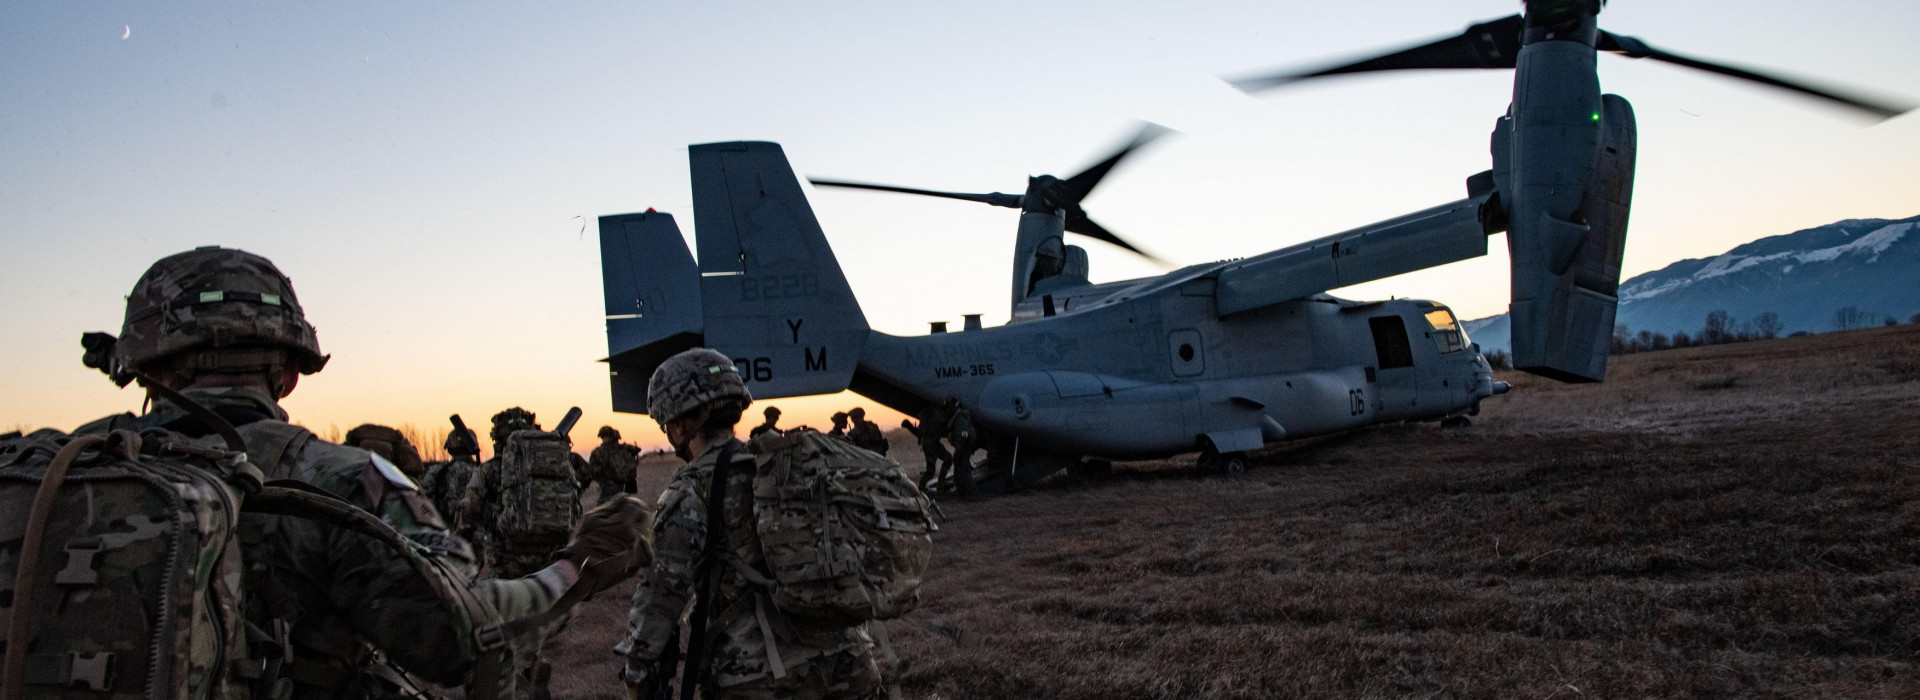 U.S. Army paratroopers assigned to 1st Battalion, 503rd Parachute Infantry Regiment load a V-22 Osprey aircraft from the 2nd Marine Aircraft Wing for extraction from their objective. This training is part of the North and West African Response Force valid